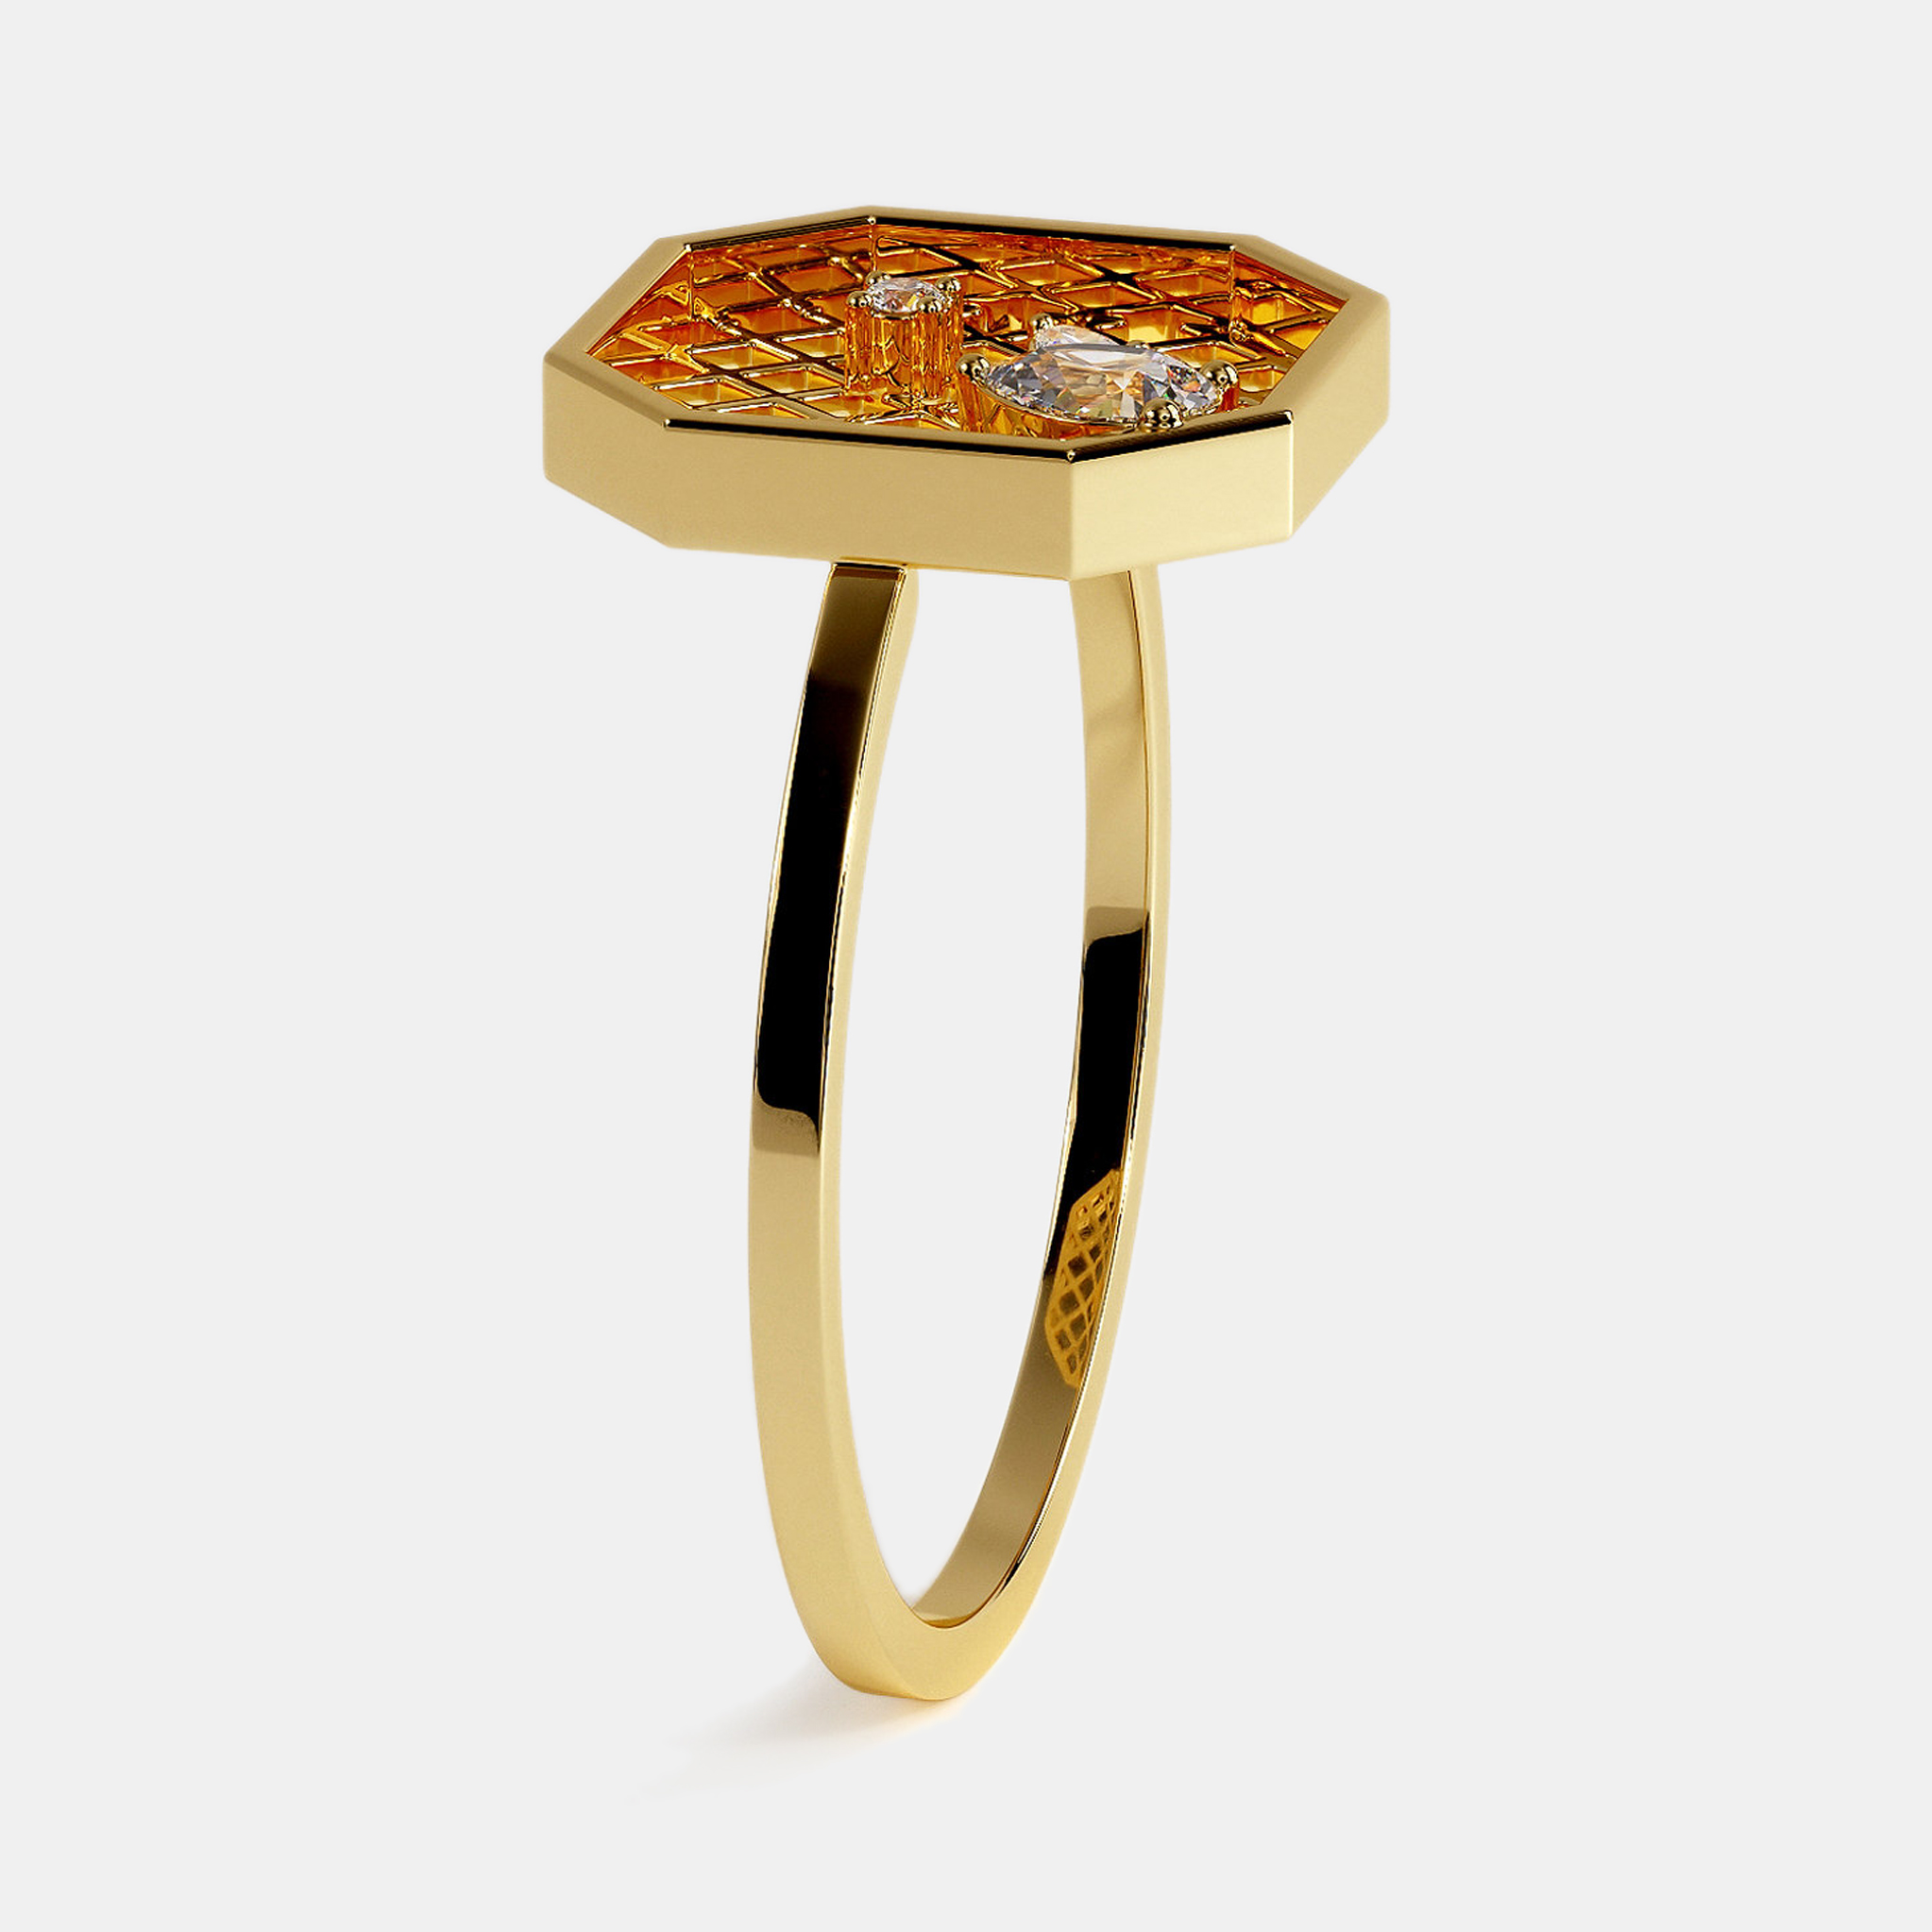 Place Vendome Ring Vendome XII 0.19 Carat Yellow Gold Size 51